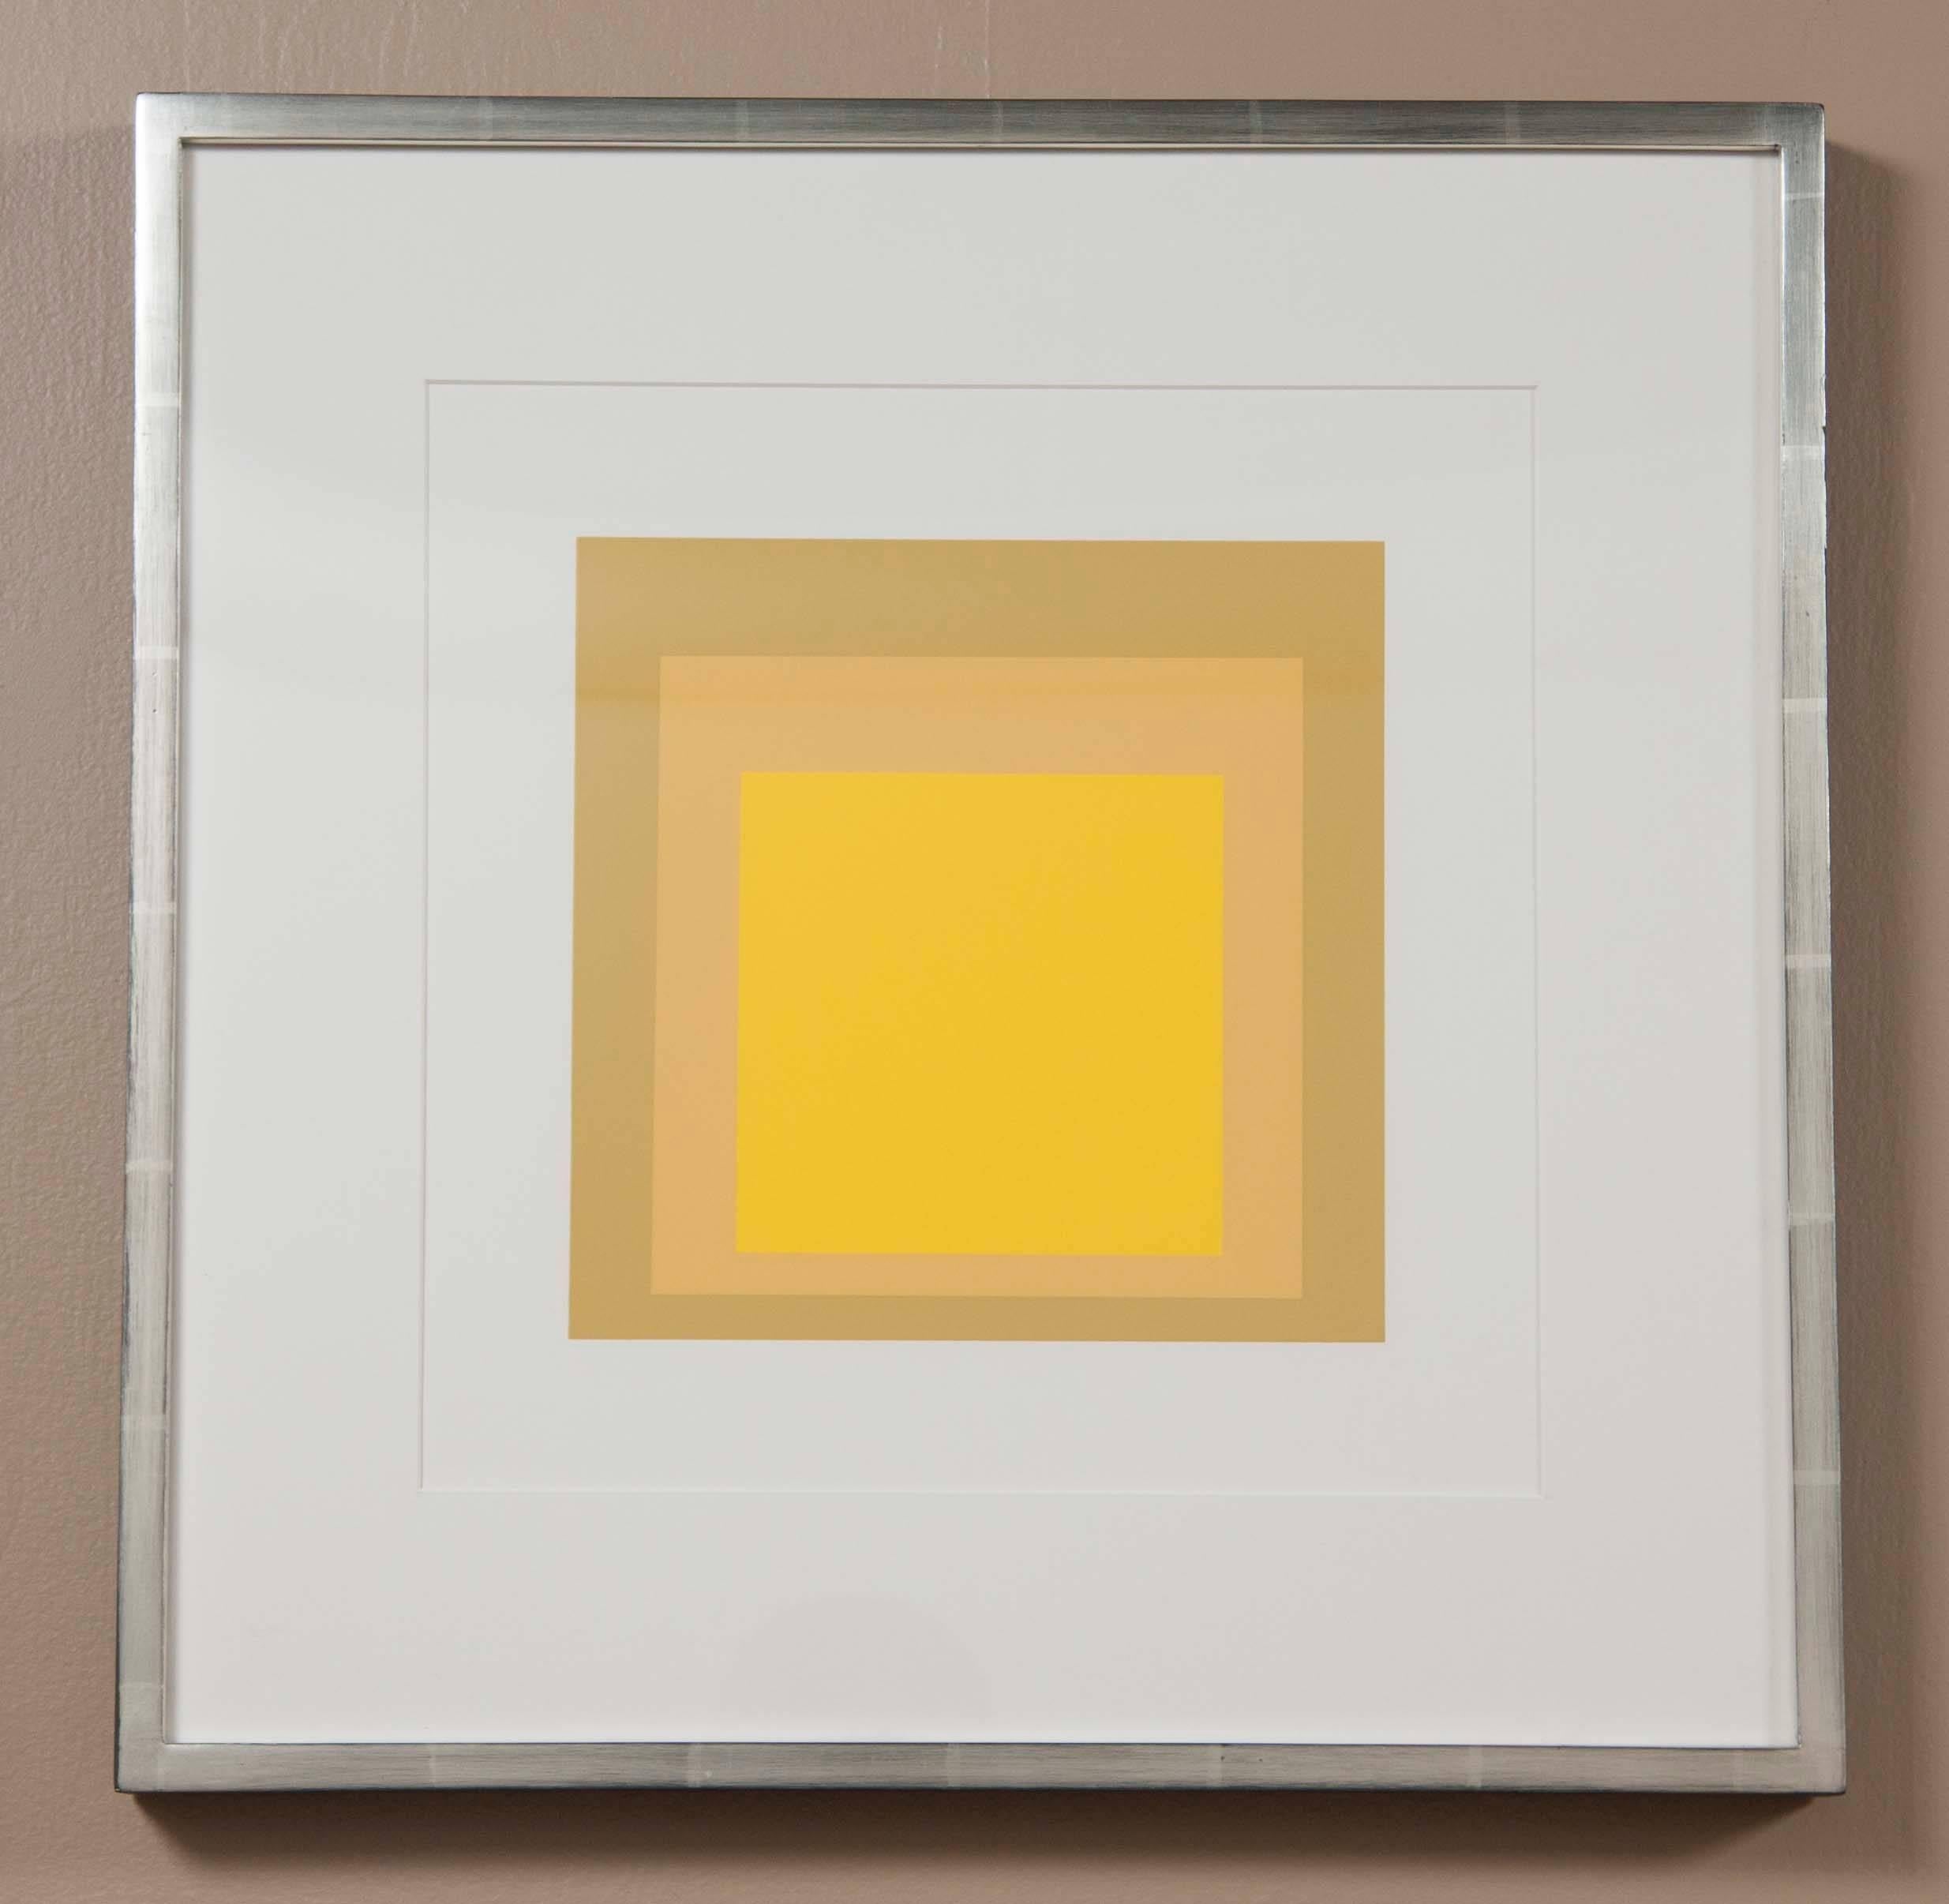 American Josef Albers Homage to the Square from Formations: Articulation, 1972 Portfolio